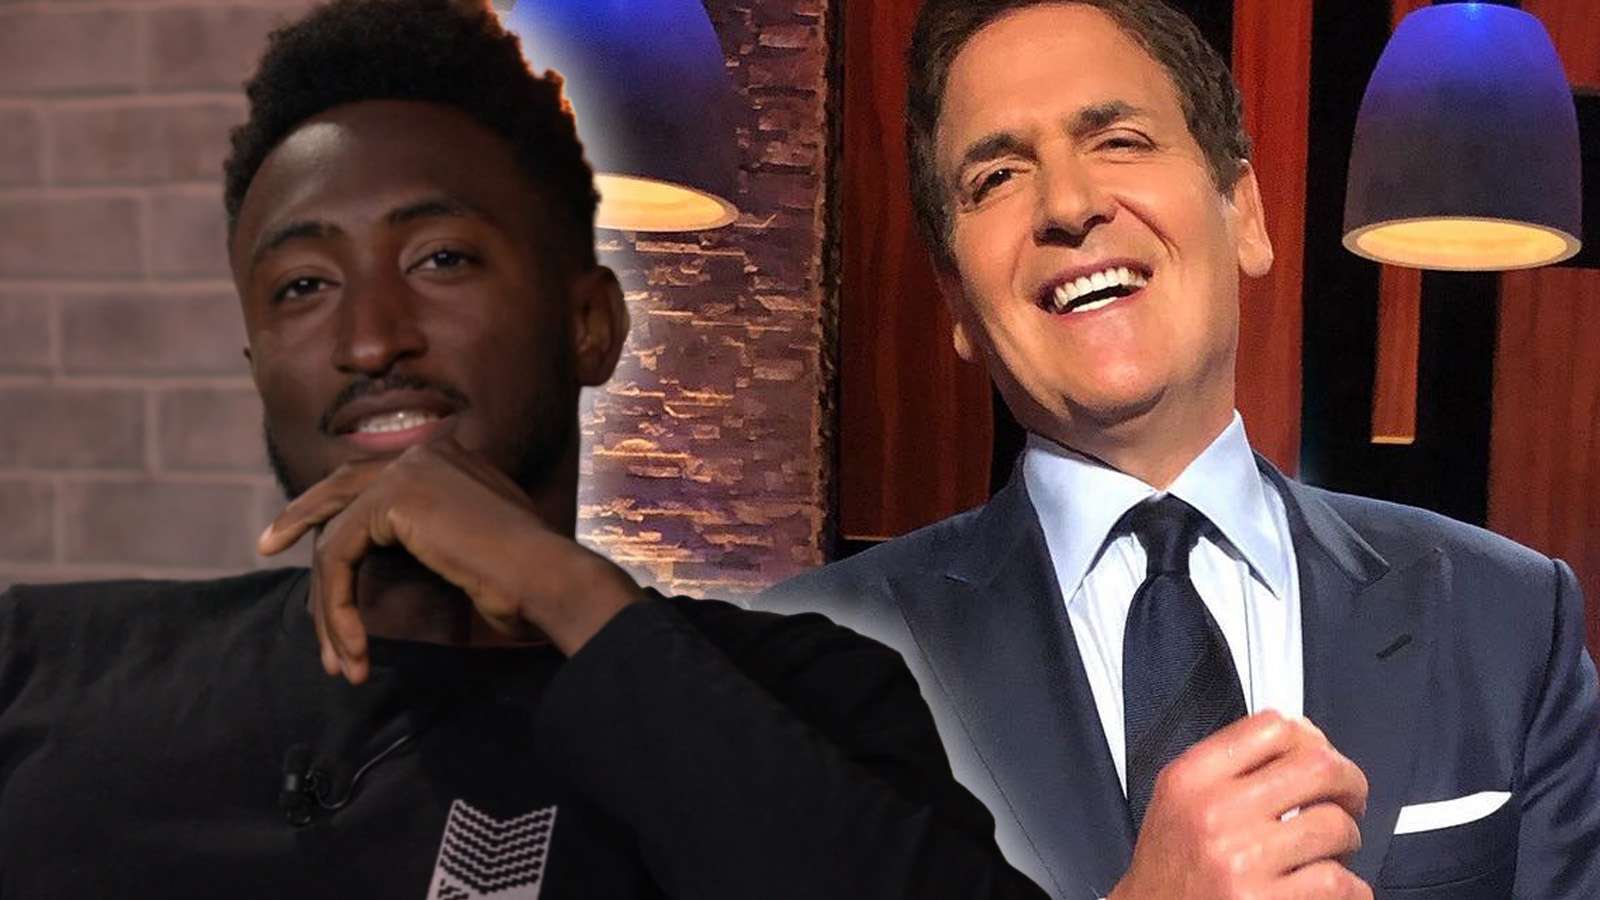 MKBHD aka Marques Brownlee on the left, Mark Cuban laughing on the right